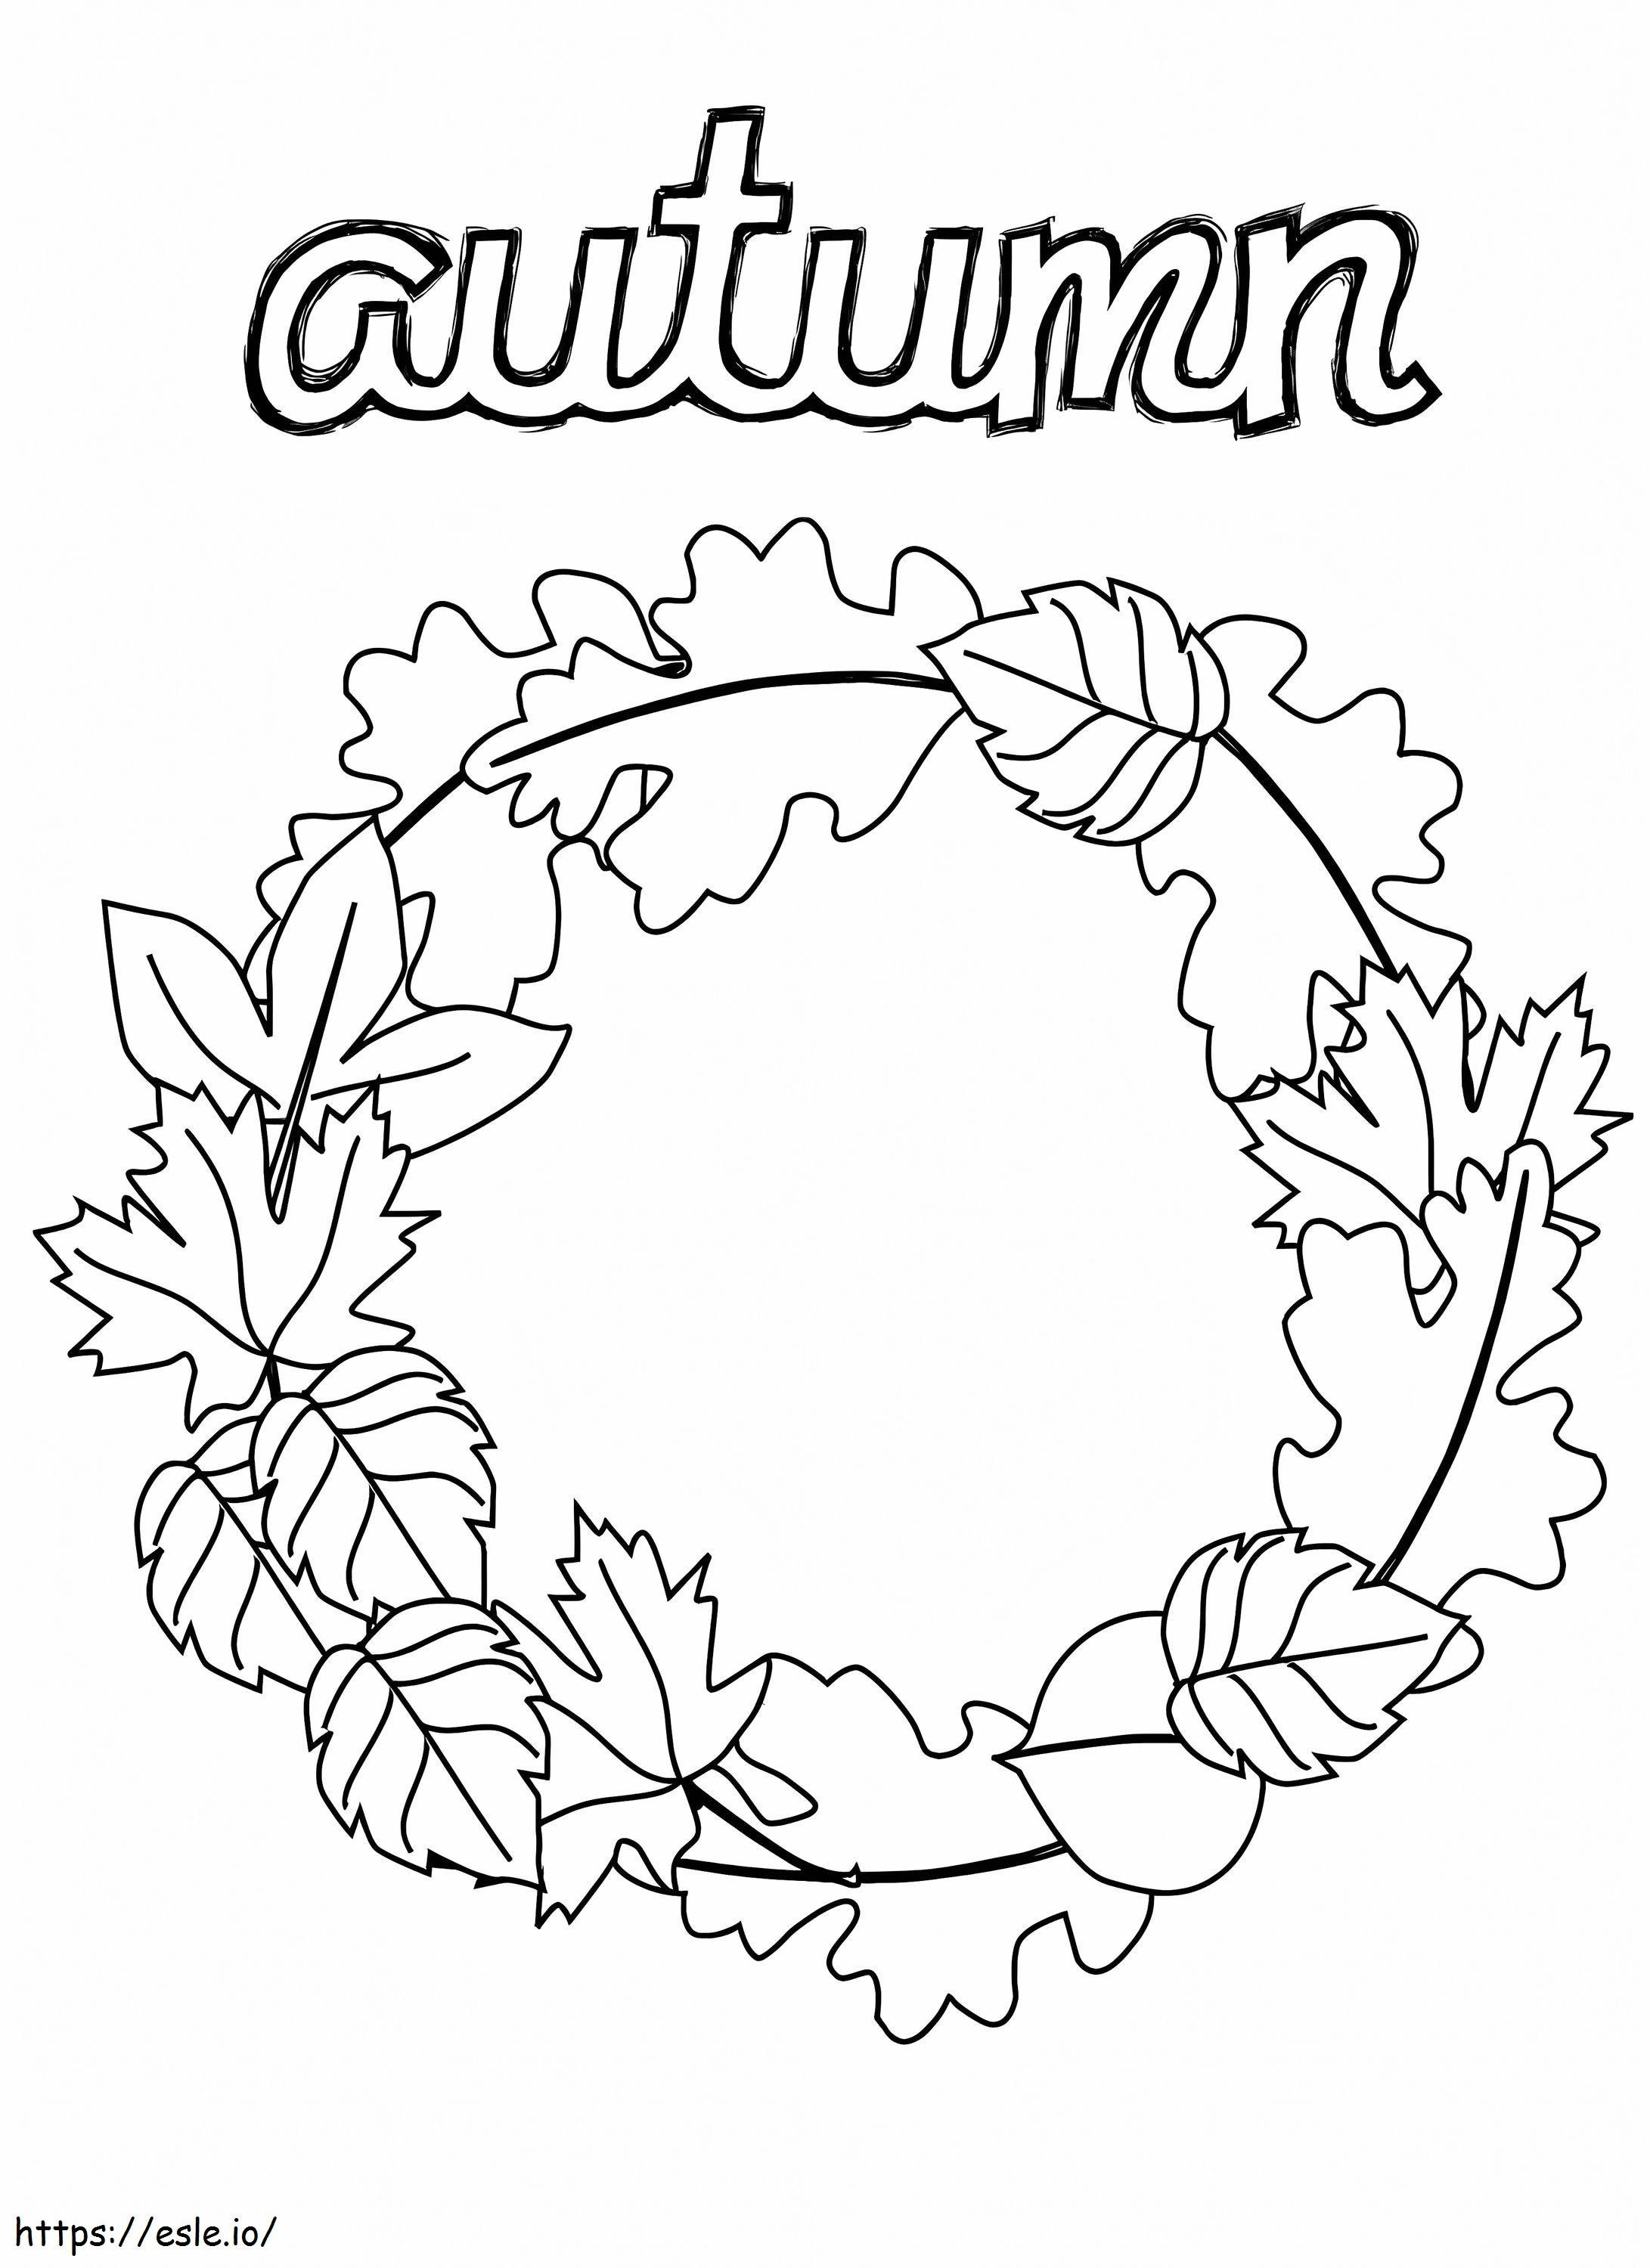 Autumn Wreath coloring page